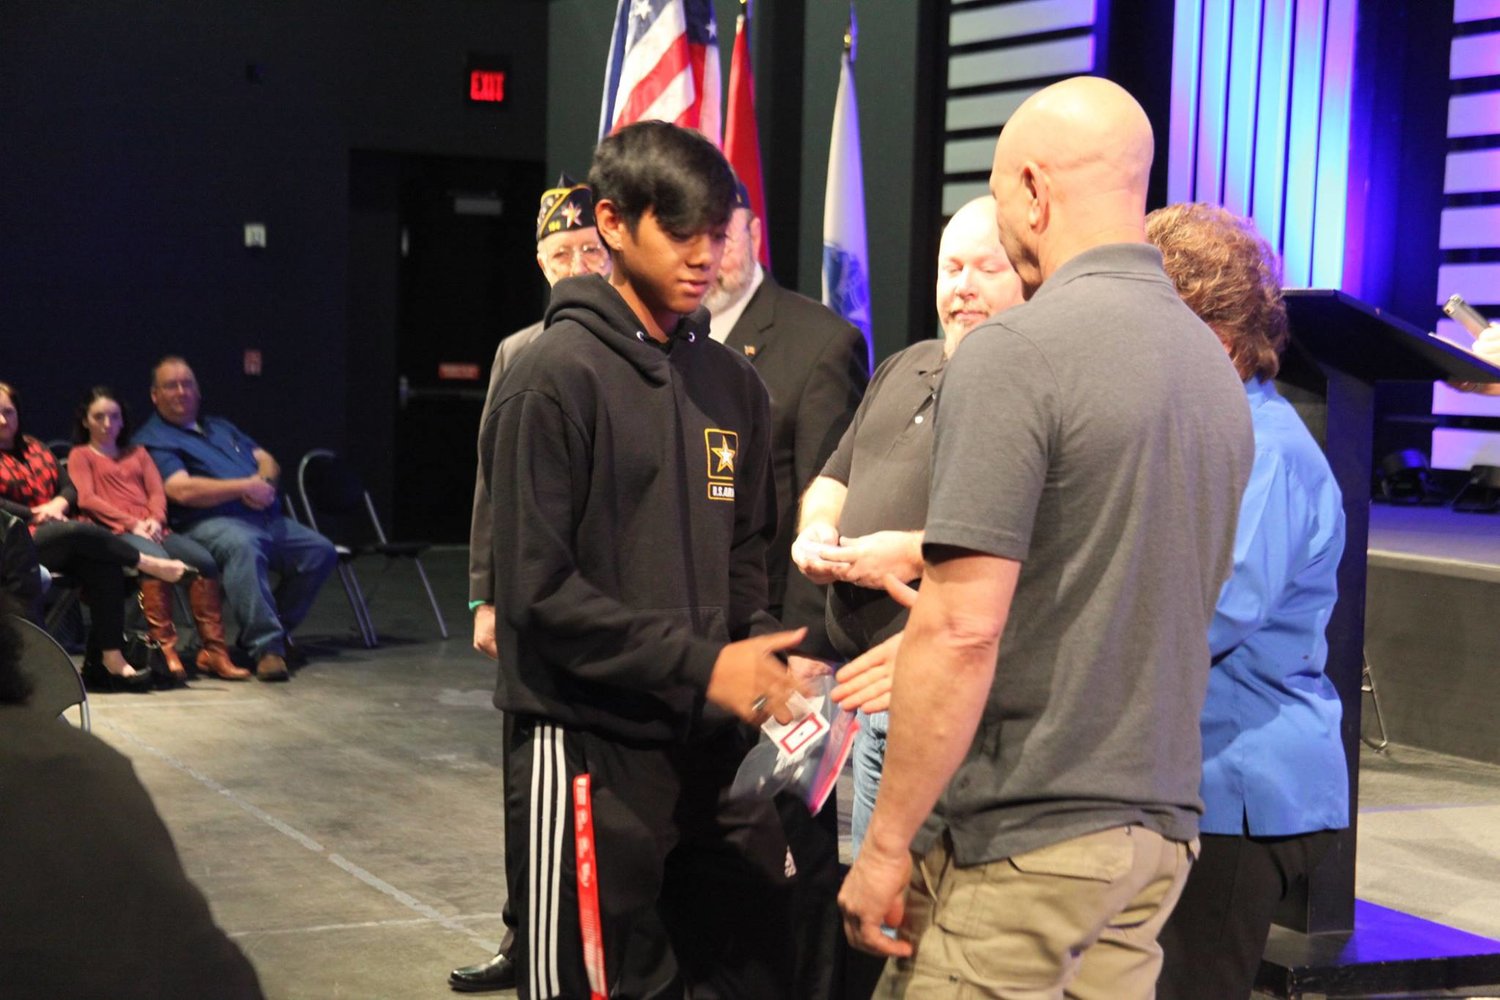 A U.S. Army recruit speaks with supporters at a Texans Embracing America’s Military event in 2019. Many of the events for 2020 were canceled due to the pandemic, but organizers are working on getting the military recruit pep rallies started up again.